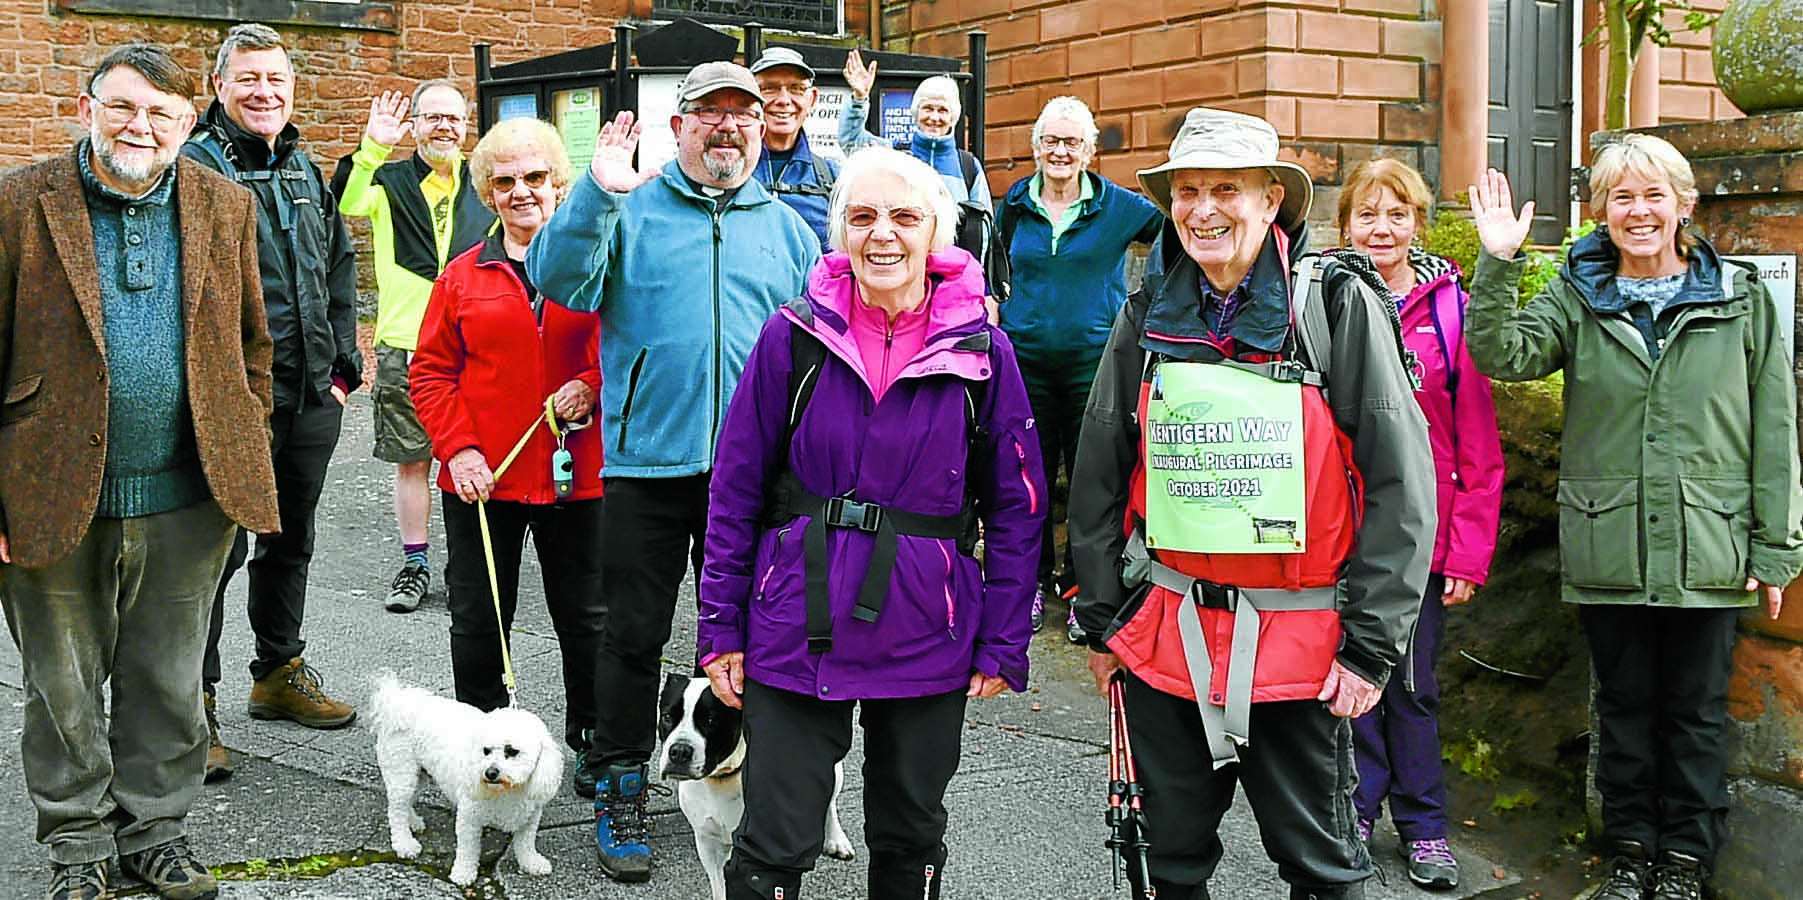 Pilgrim route is launched